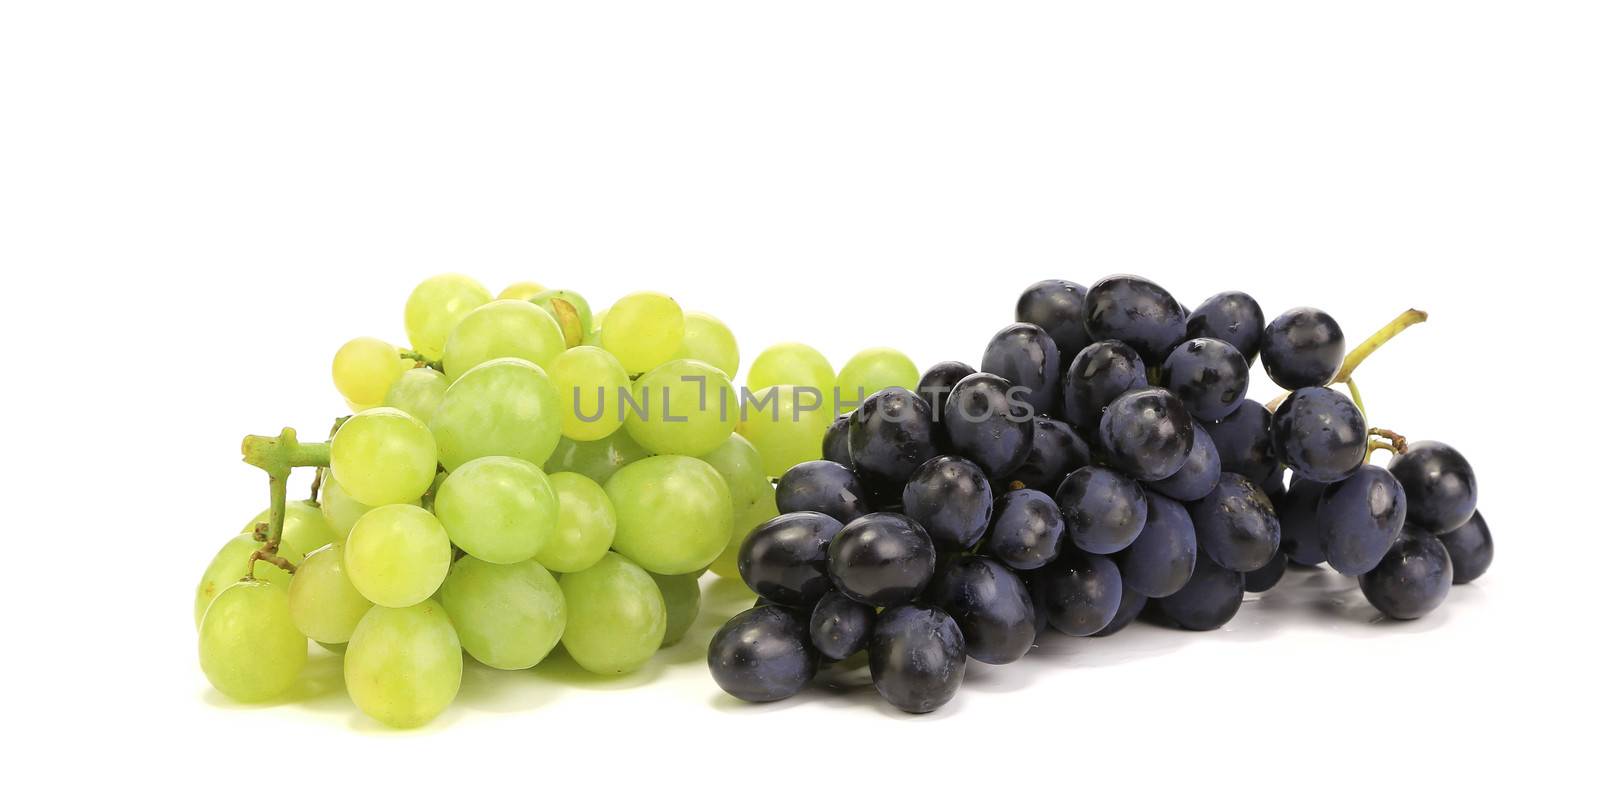 White and blue grape bunches. by indigolotos